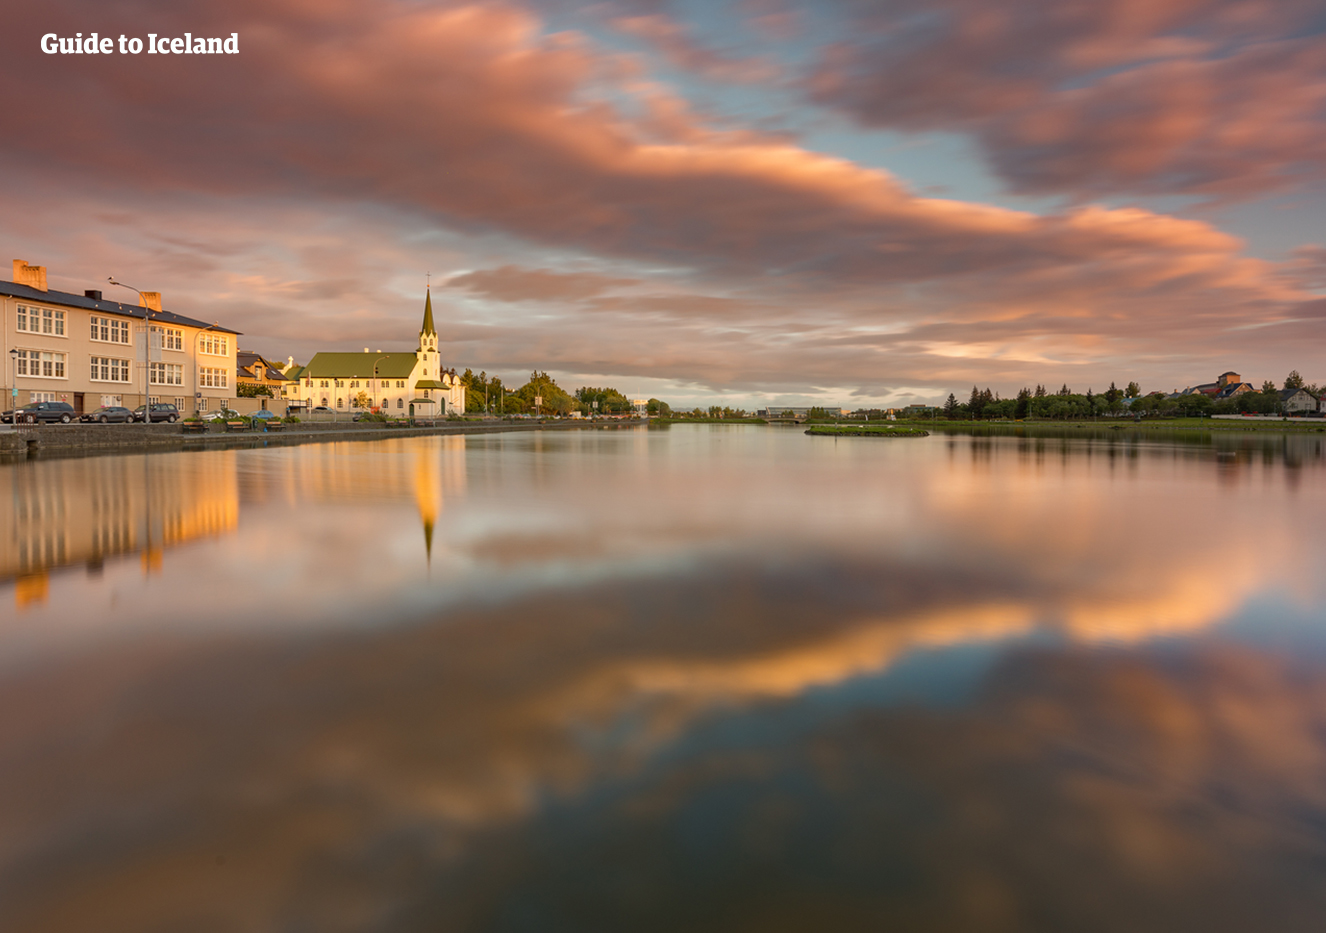 Reykjavik is a beautiful city, with Tjornin Pond at its centre.